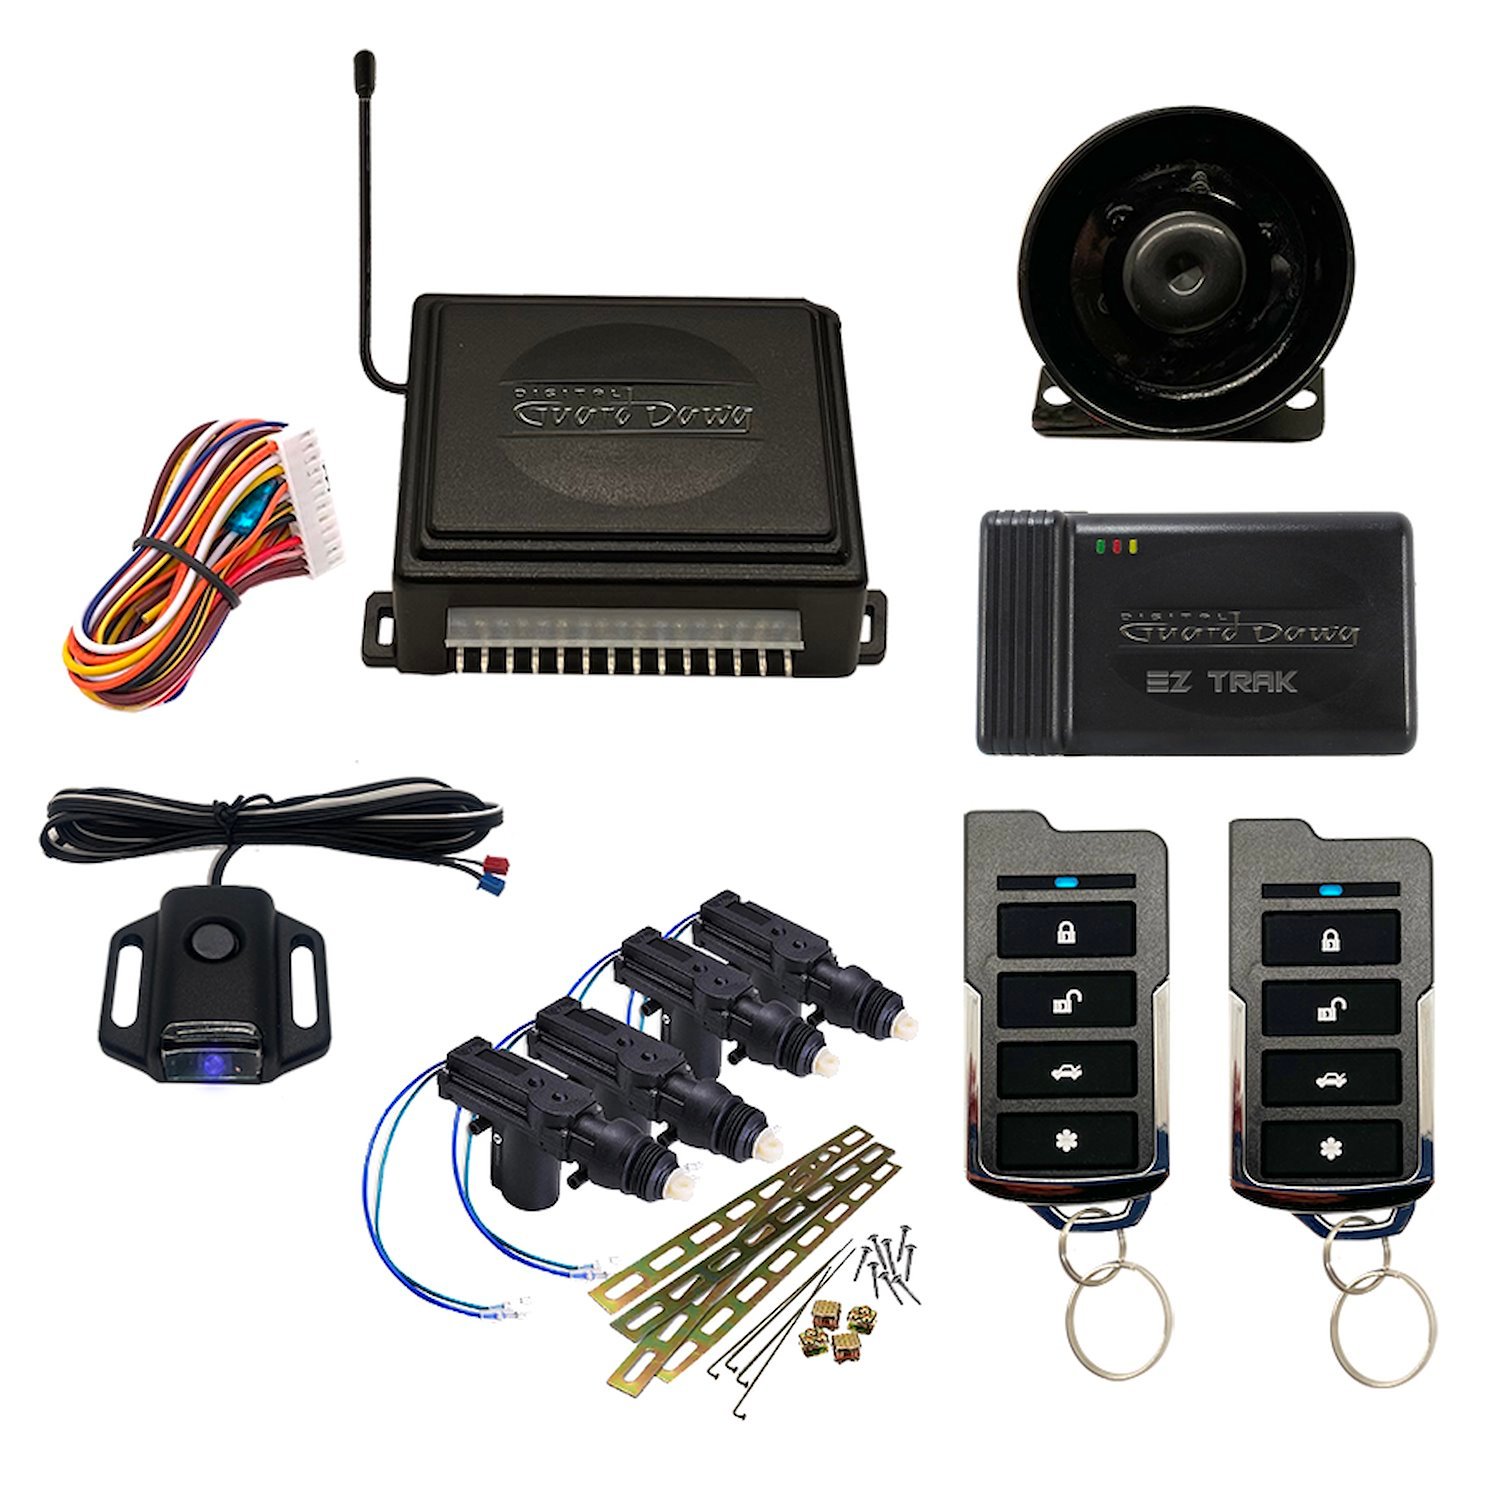 DGD-KY-4A-EZ Keyless Entry w/4-Door Actuator Kit and Smart Phone EZ-Tracking